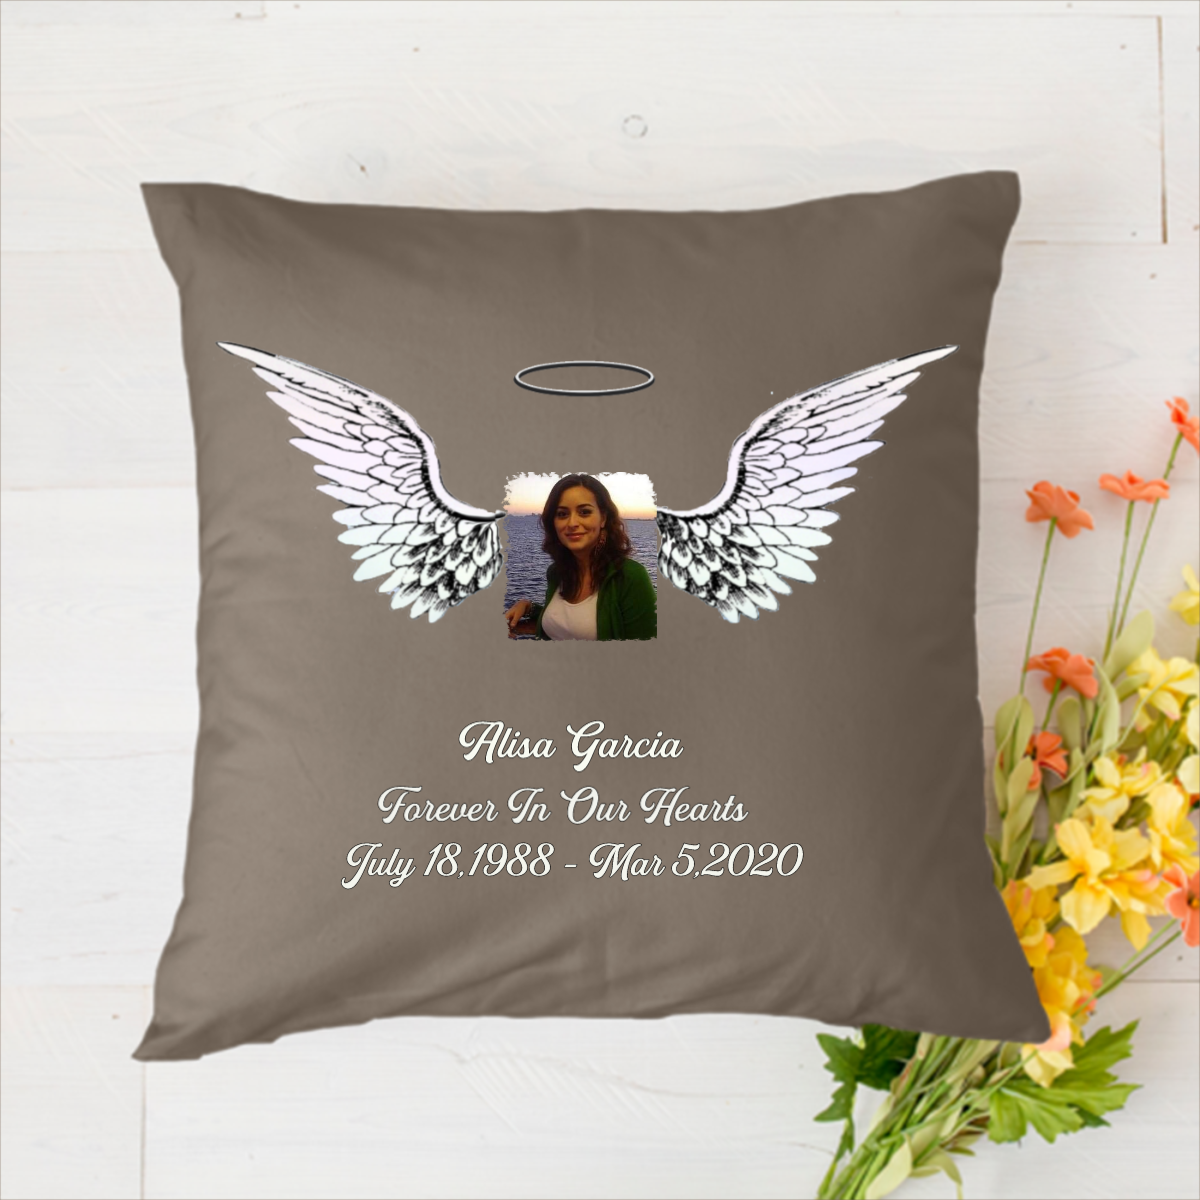 Personalized Photo and Name Memorial Polyester Linen Pillow